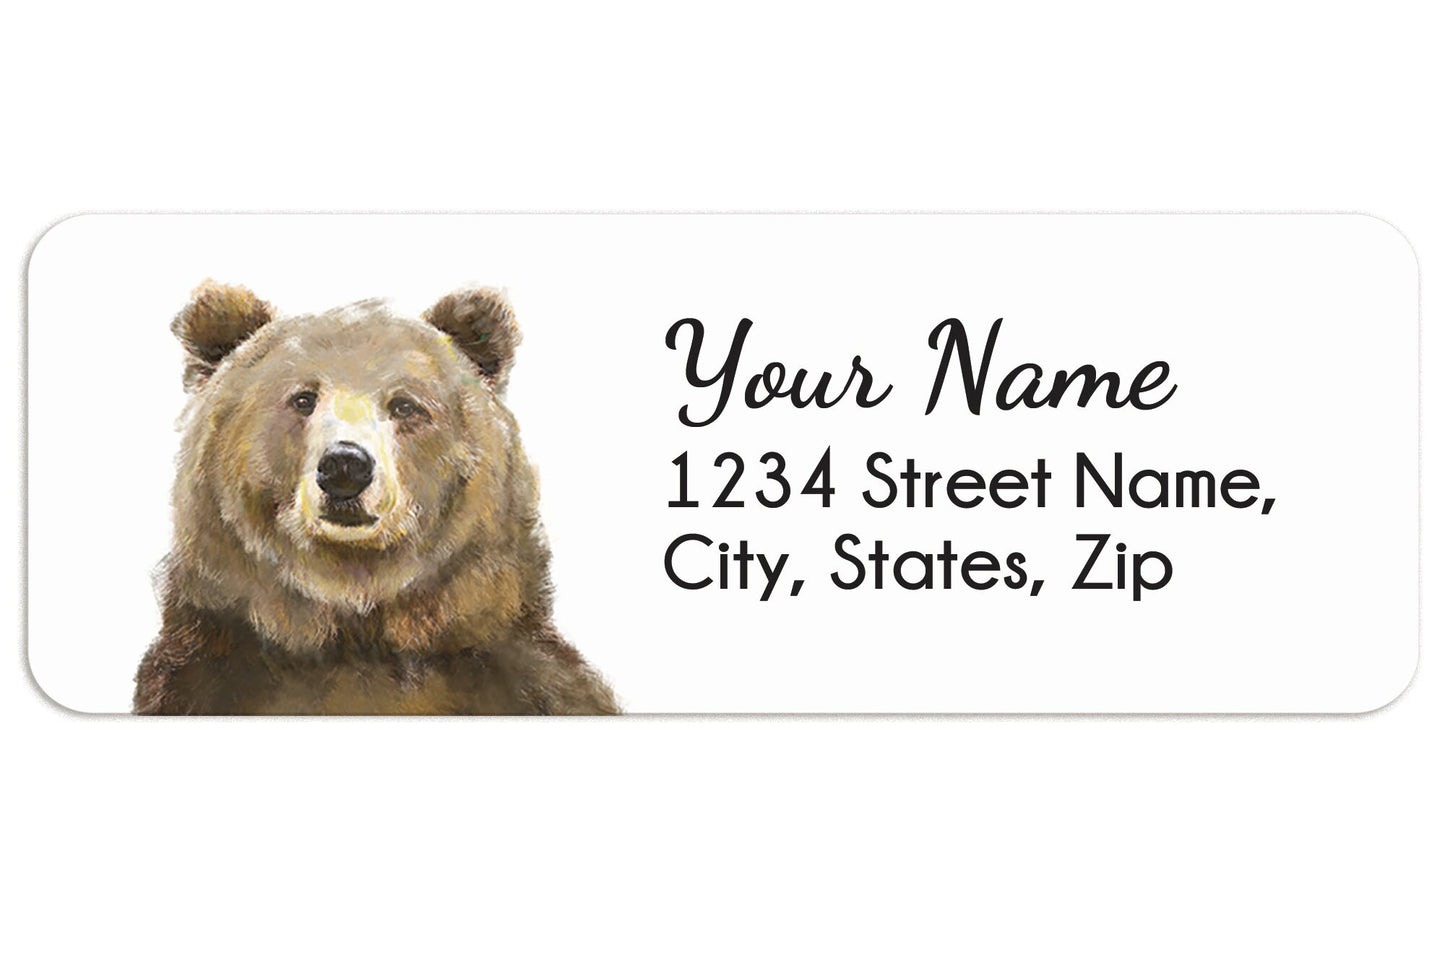 Grizzly Bear Personalized Address Label